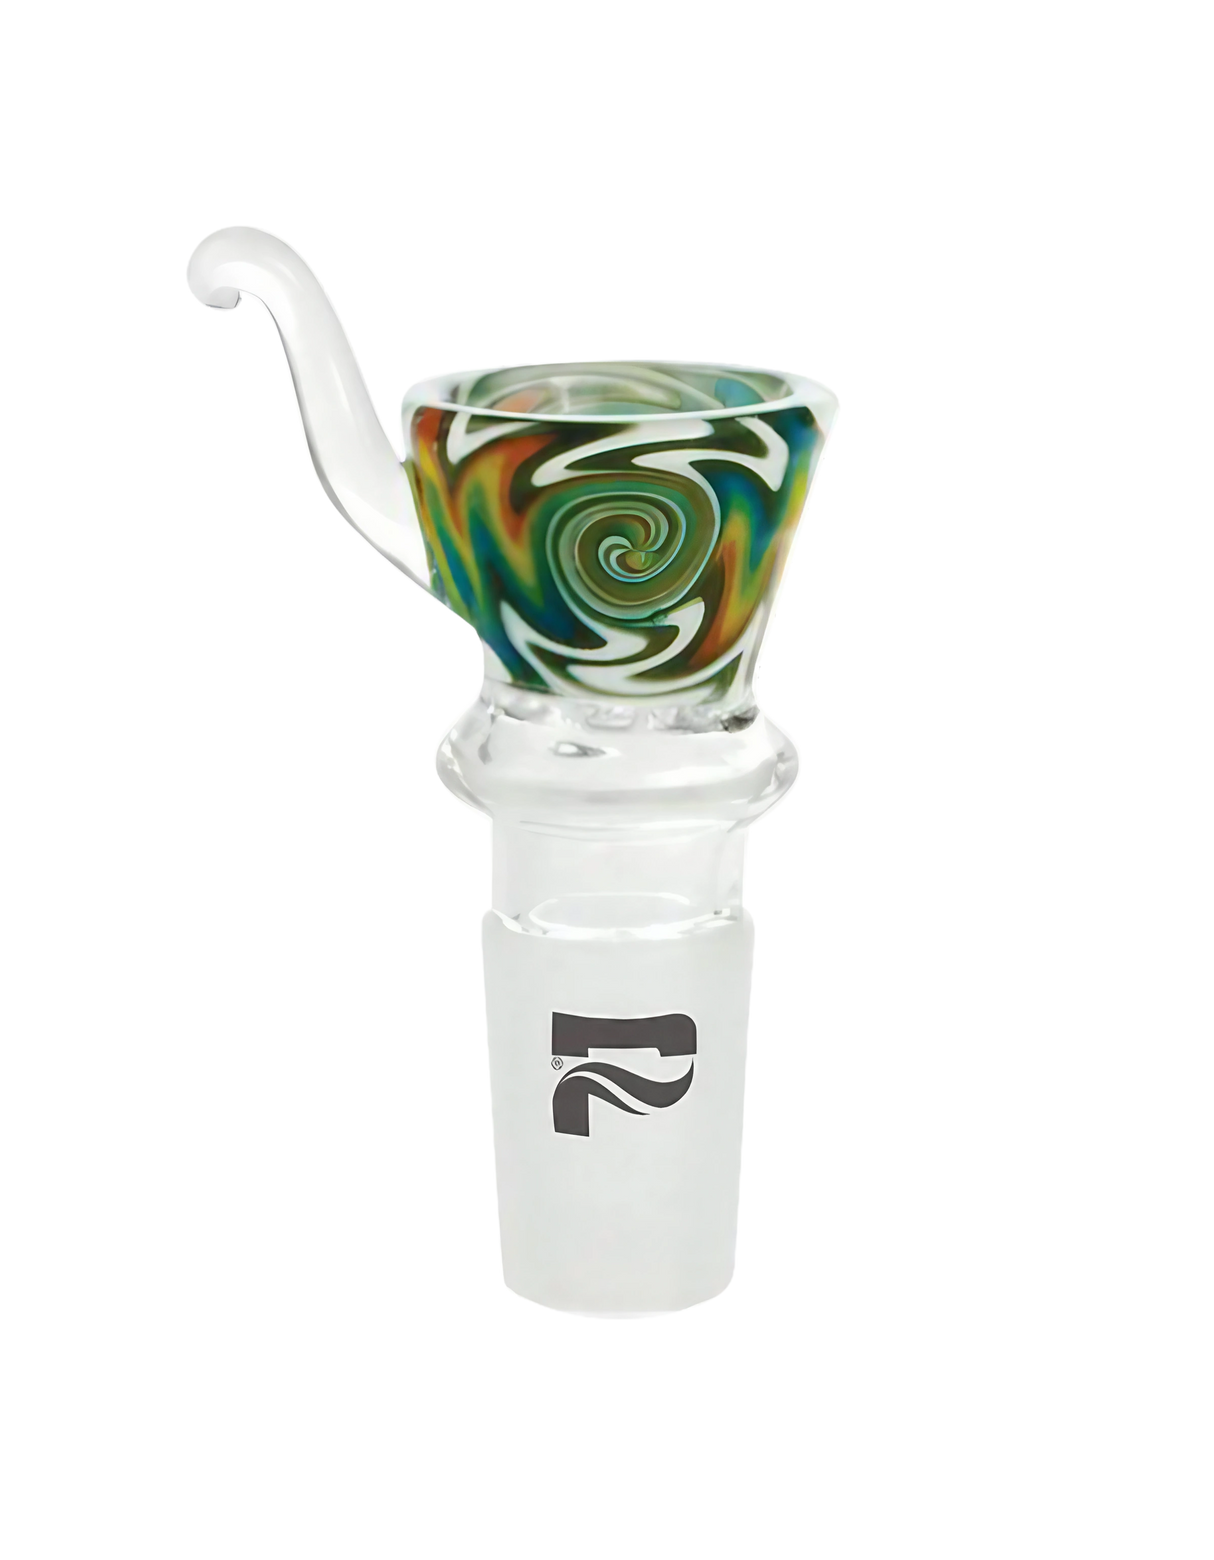 Pulsar Worked Herb Slide with swirl design, 19mm Male Bowl, front view on white background